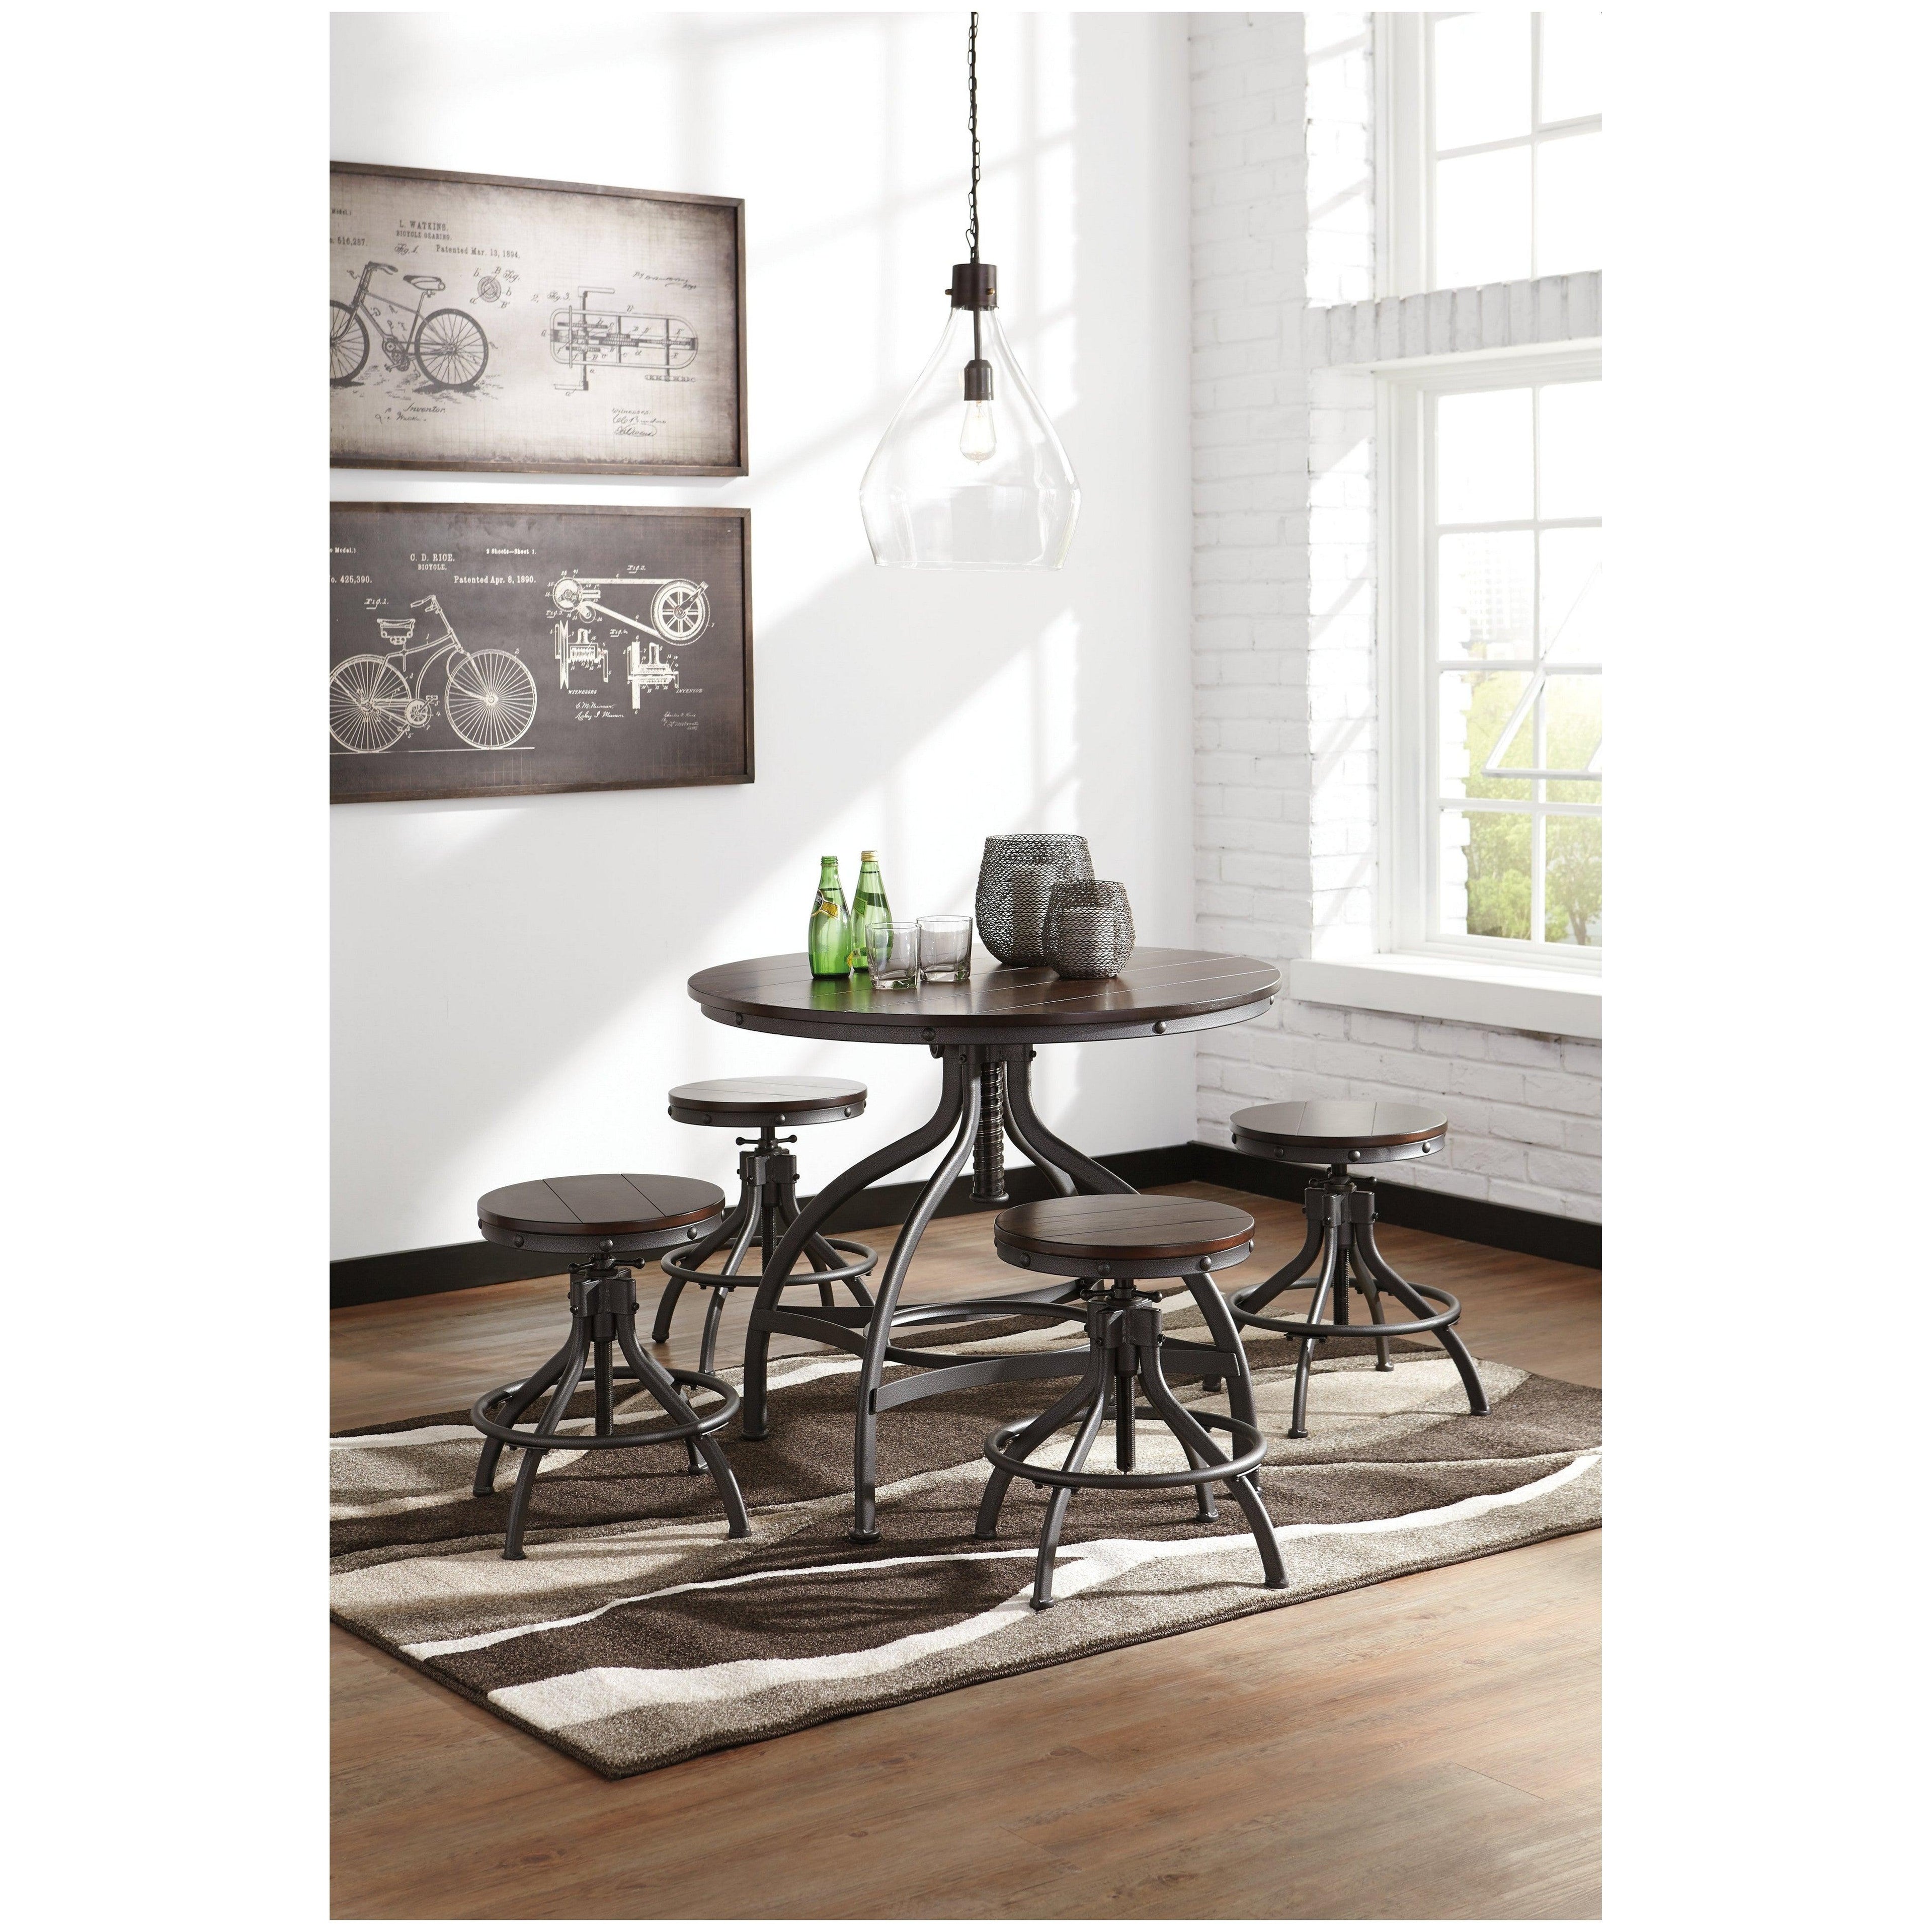 Odium Counter Height Dining Table and Bar Stools (Set of 5) Ash-D284-223